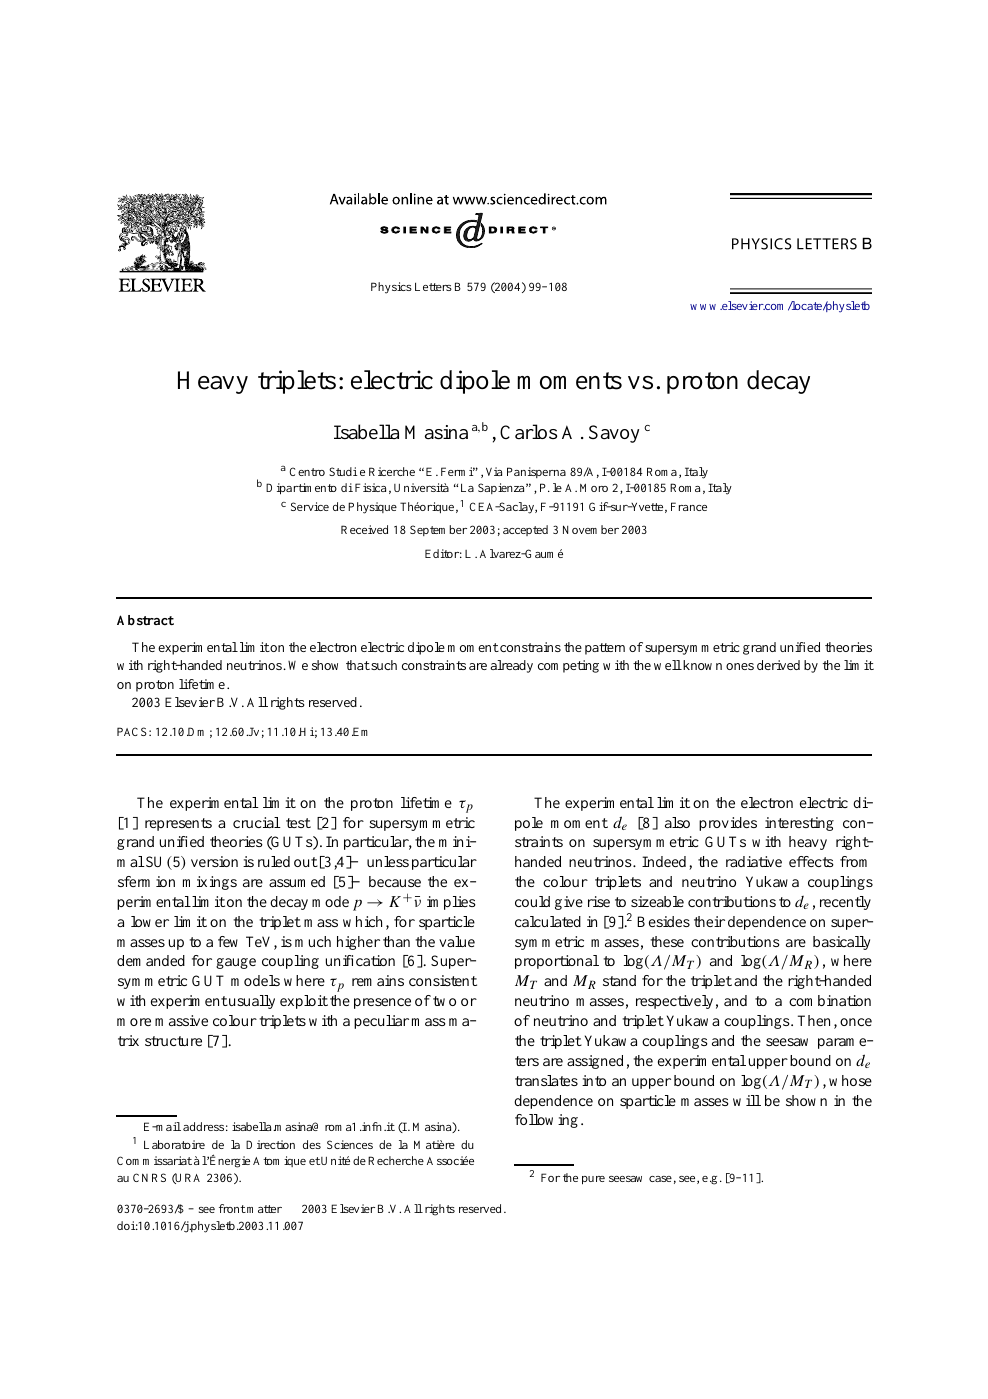 Heavy Triplets Electric Dipole Moments Vs Proton Decay Topic Of Research Paper In Physical Sciences Download Scholarly Article Pdf And Read For Free On Cyberleninka Open Science Hub